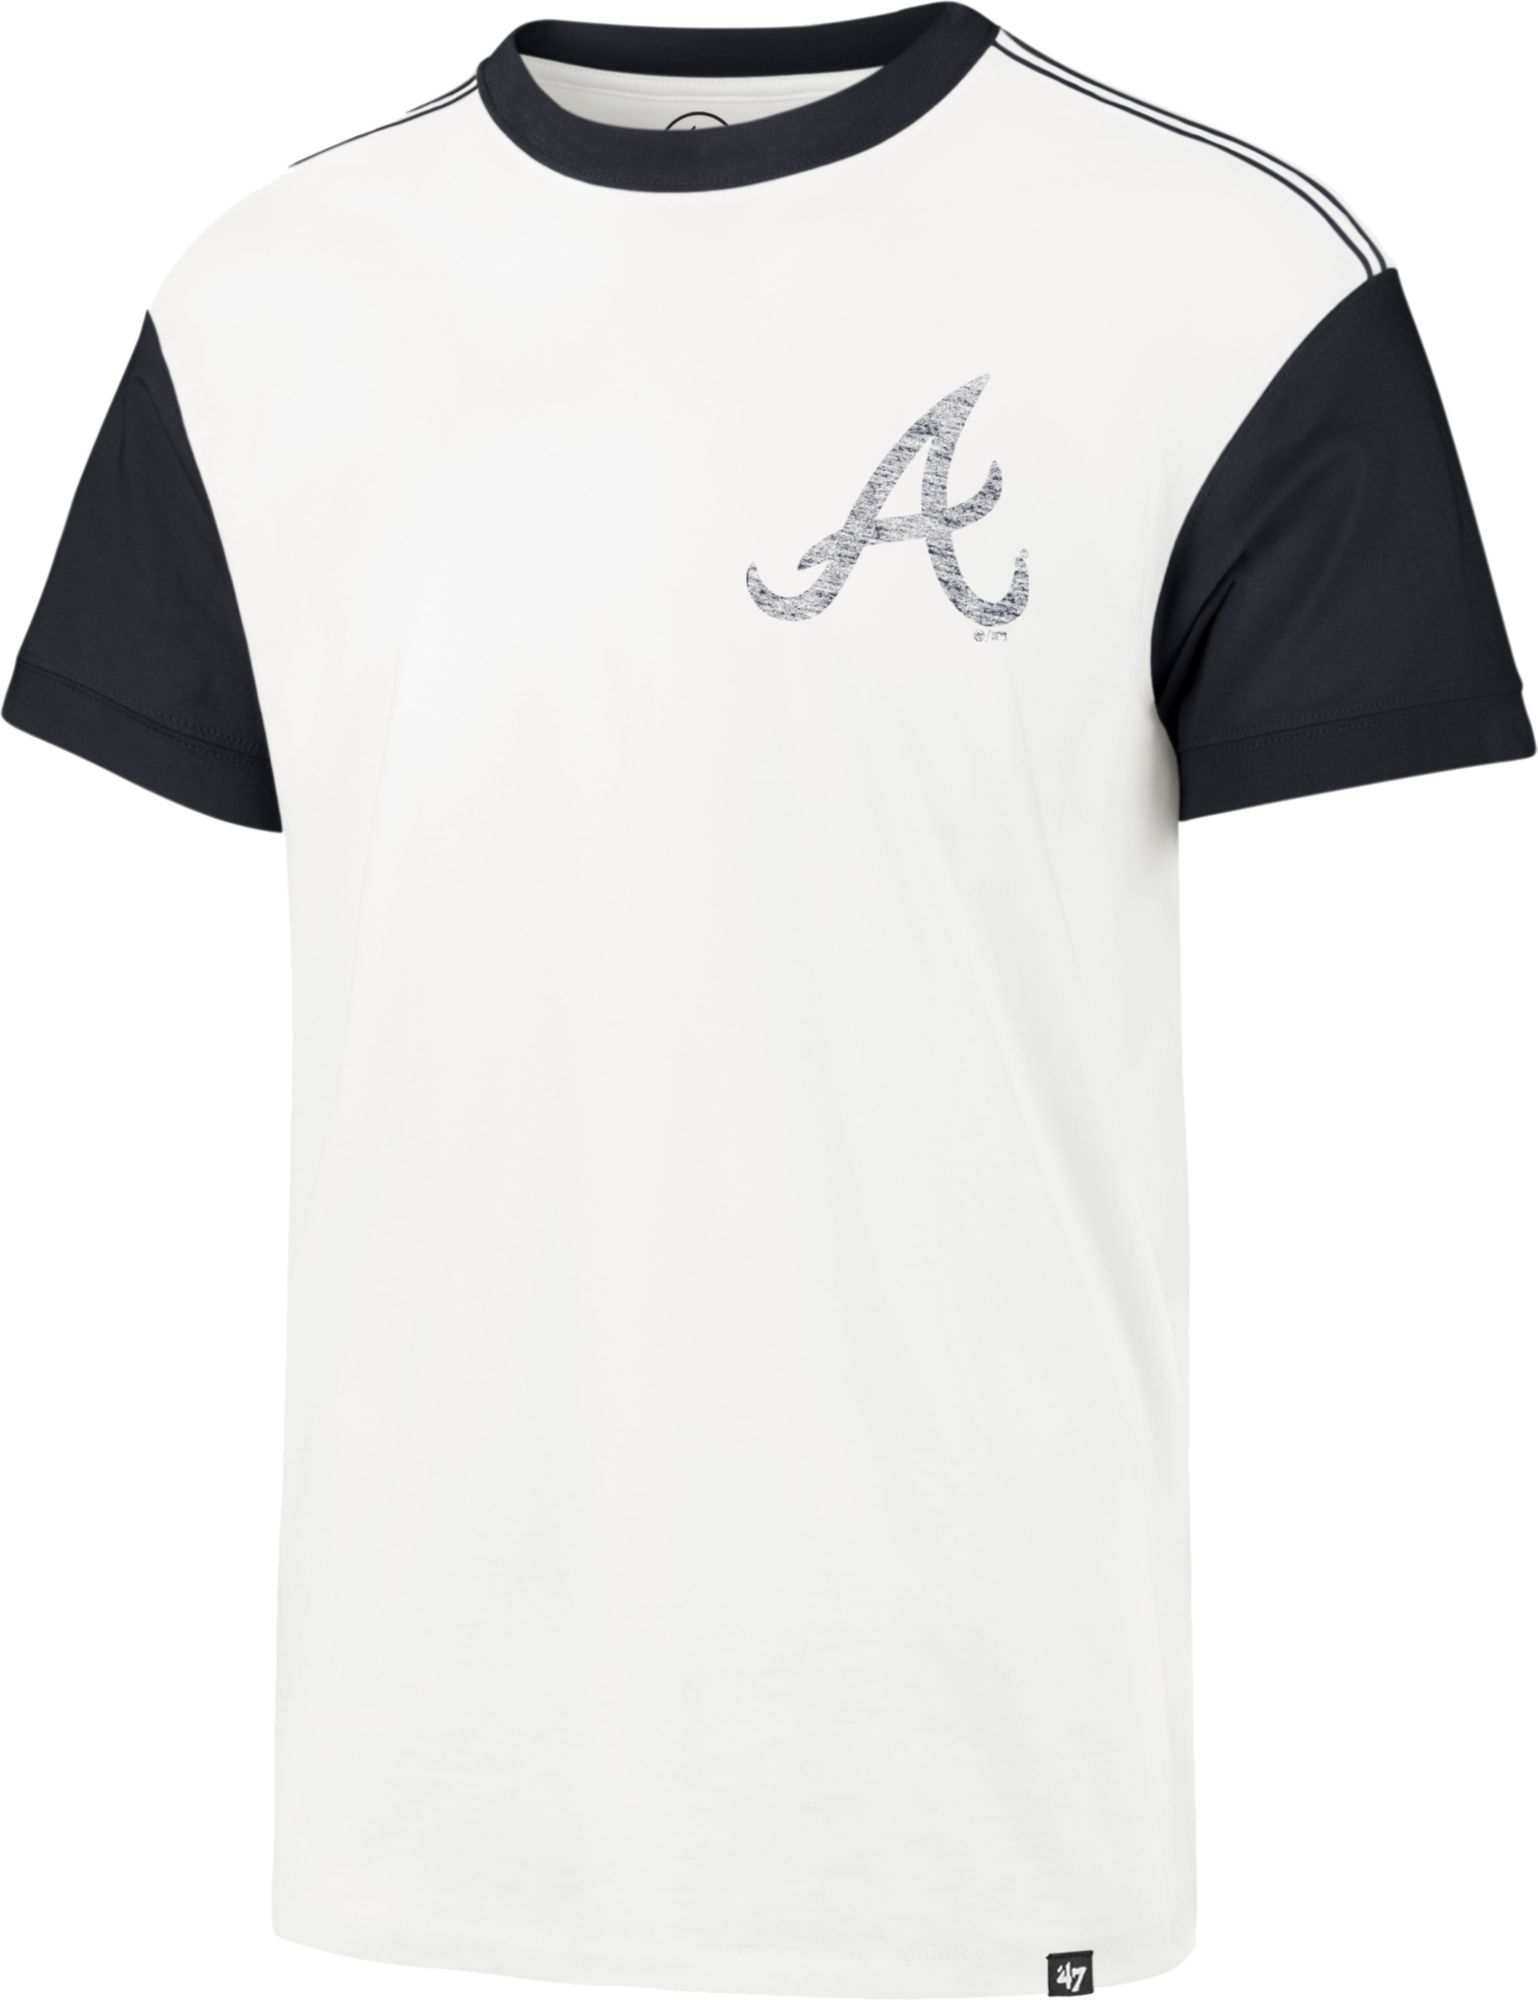 Atlanta Braves - Now introducing the '47 t-shirts designed